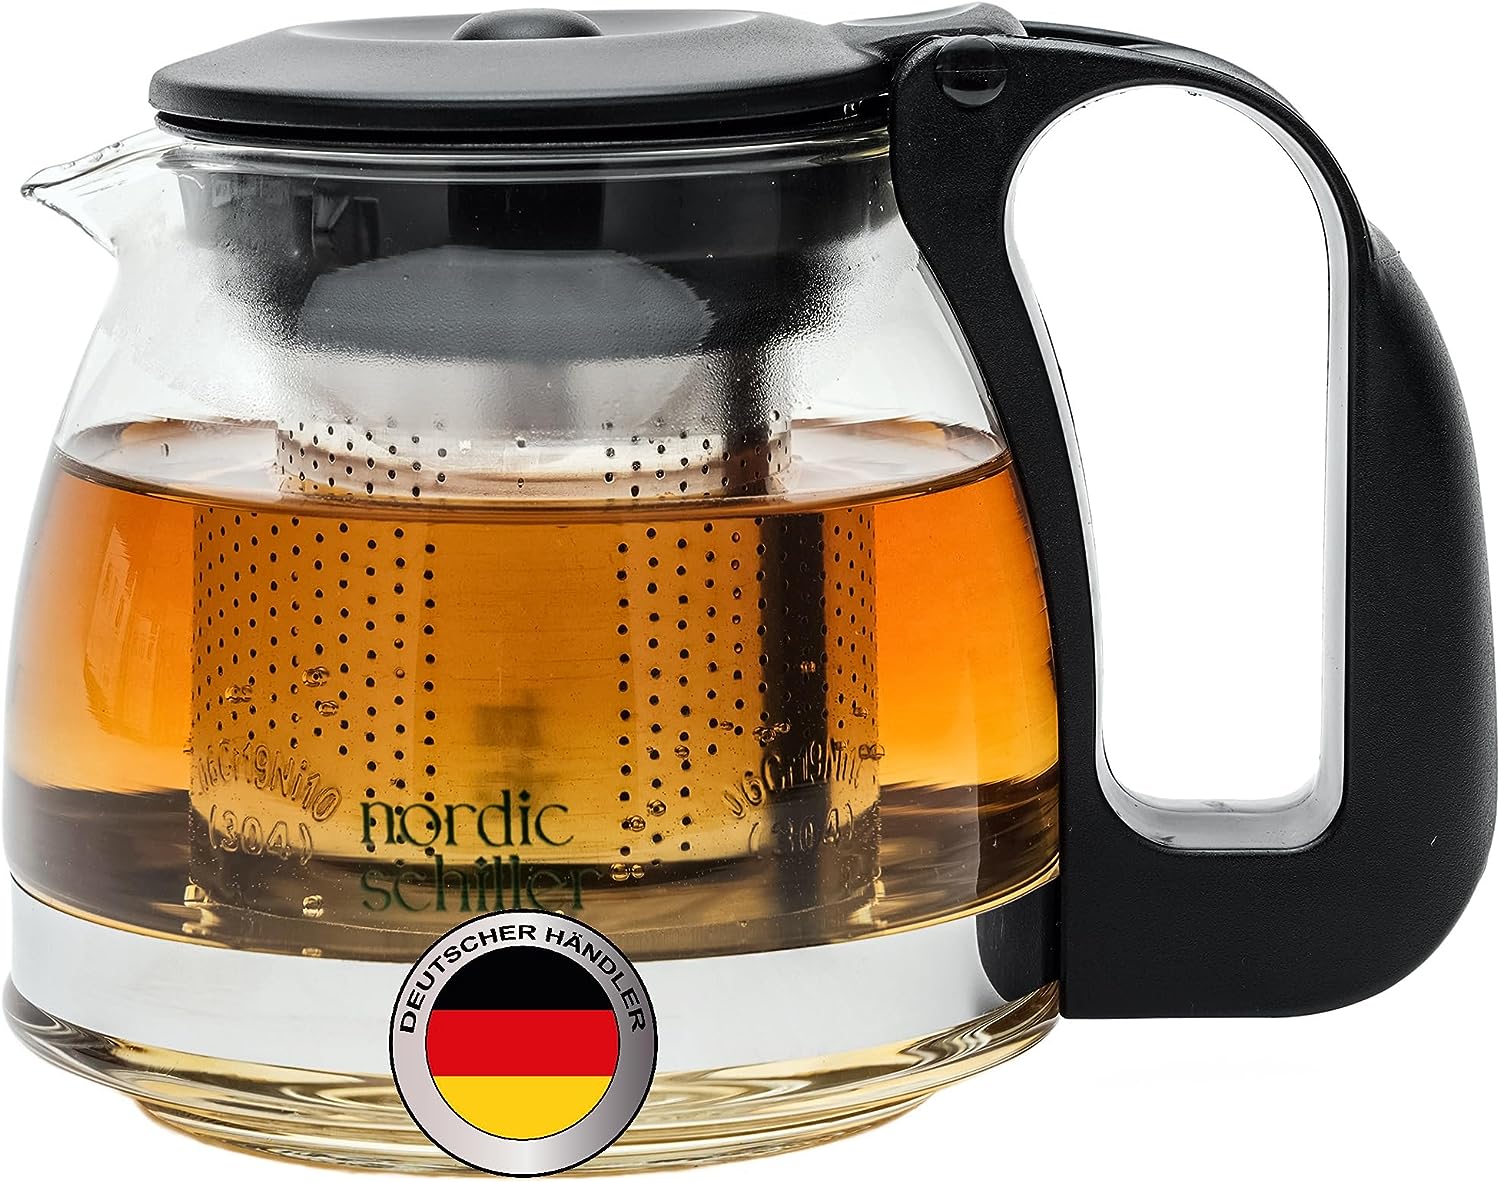 NORDIC SCHILLER Premium Glass Teapot, Heat Resistant Glass Jug with Lid, 700 ml, Teapot with Strainer Insert, Thermal Teapot with Stainless Steel Filter Strainer, Tea Maker, Teapot with Strainer, Tea